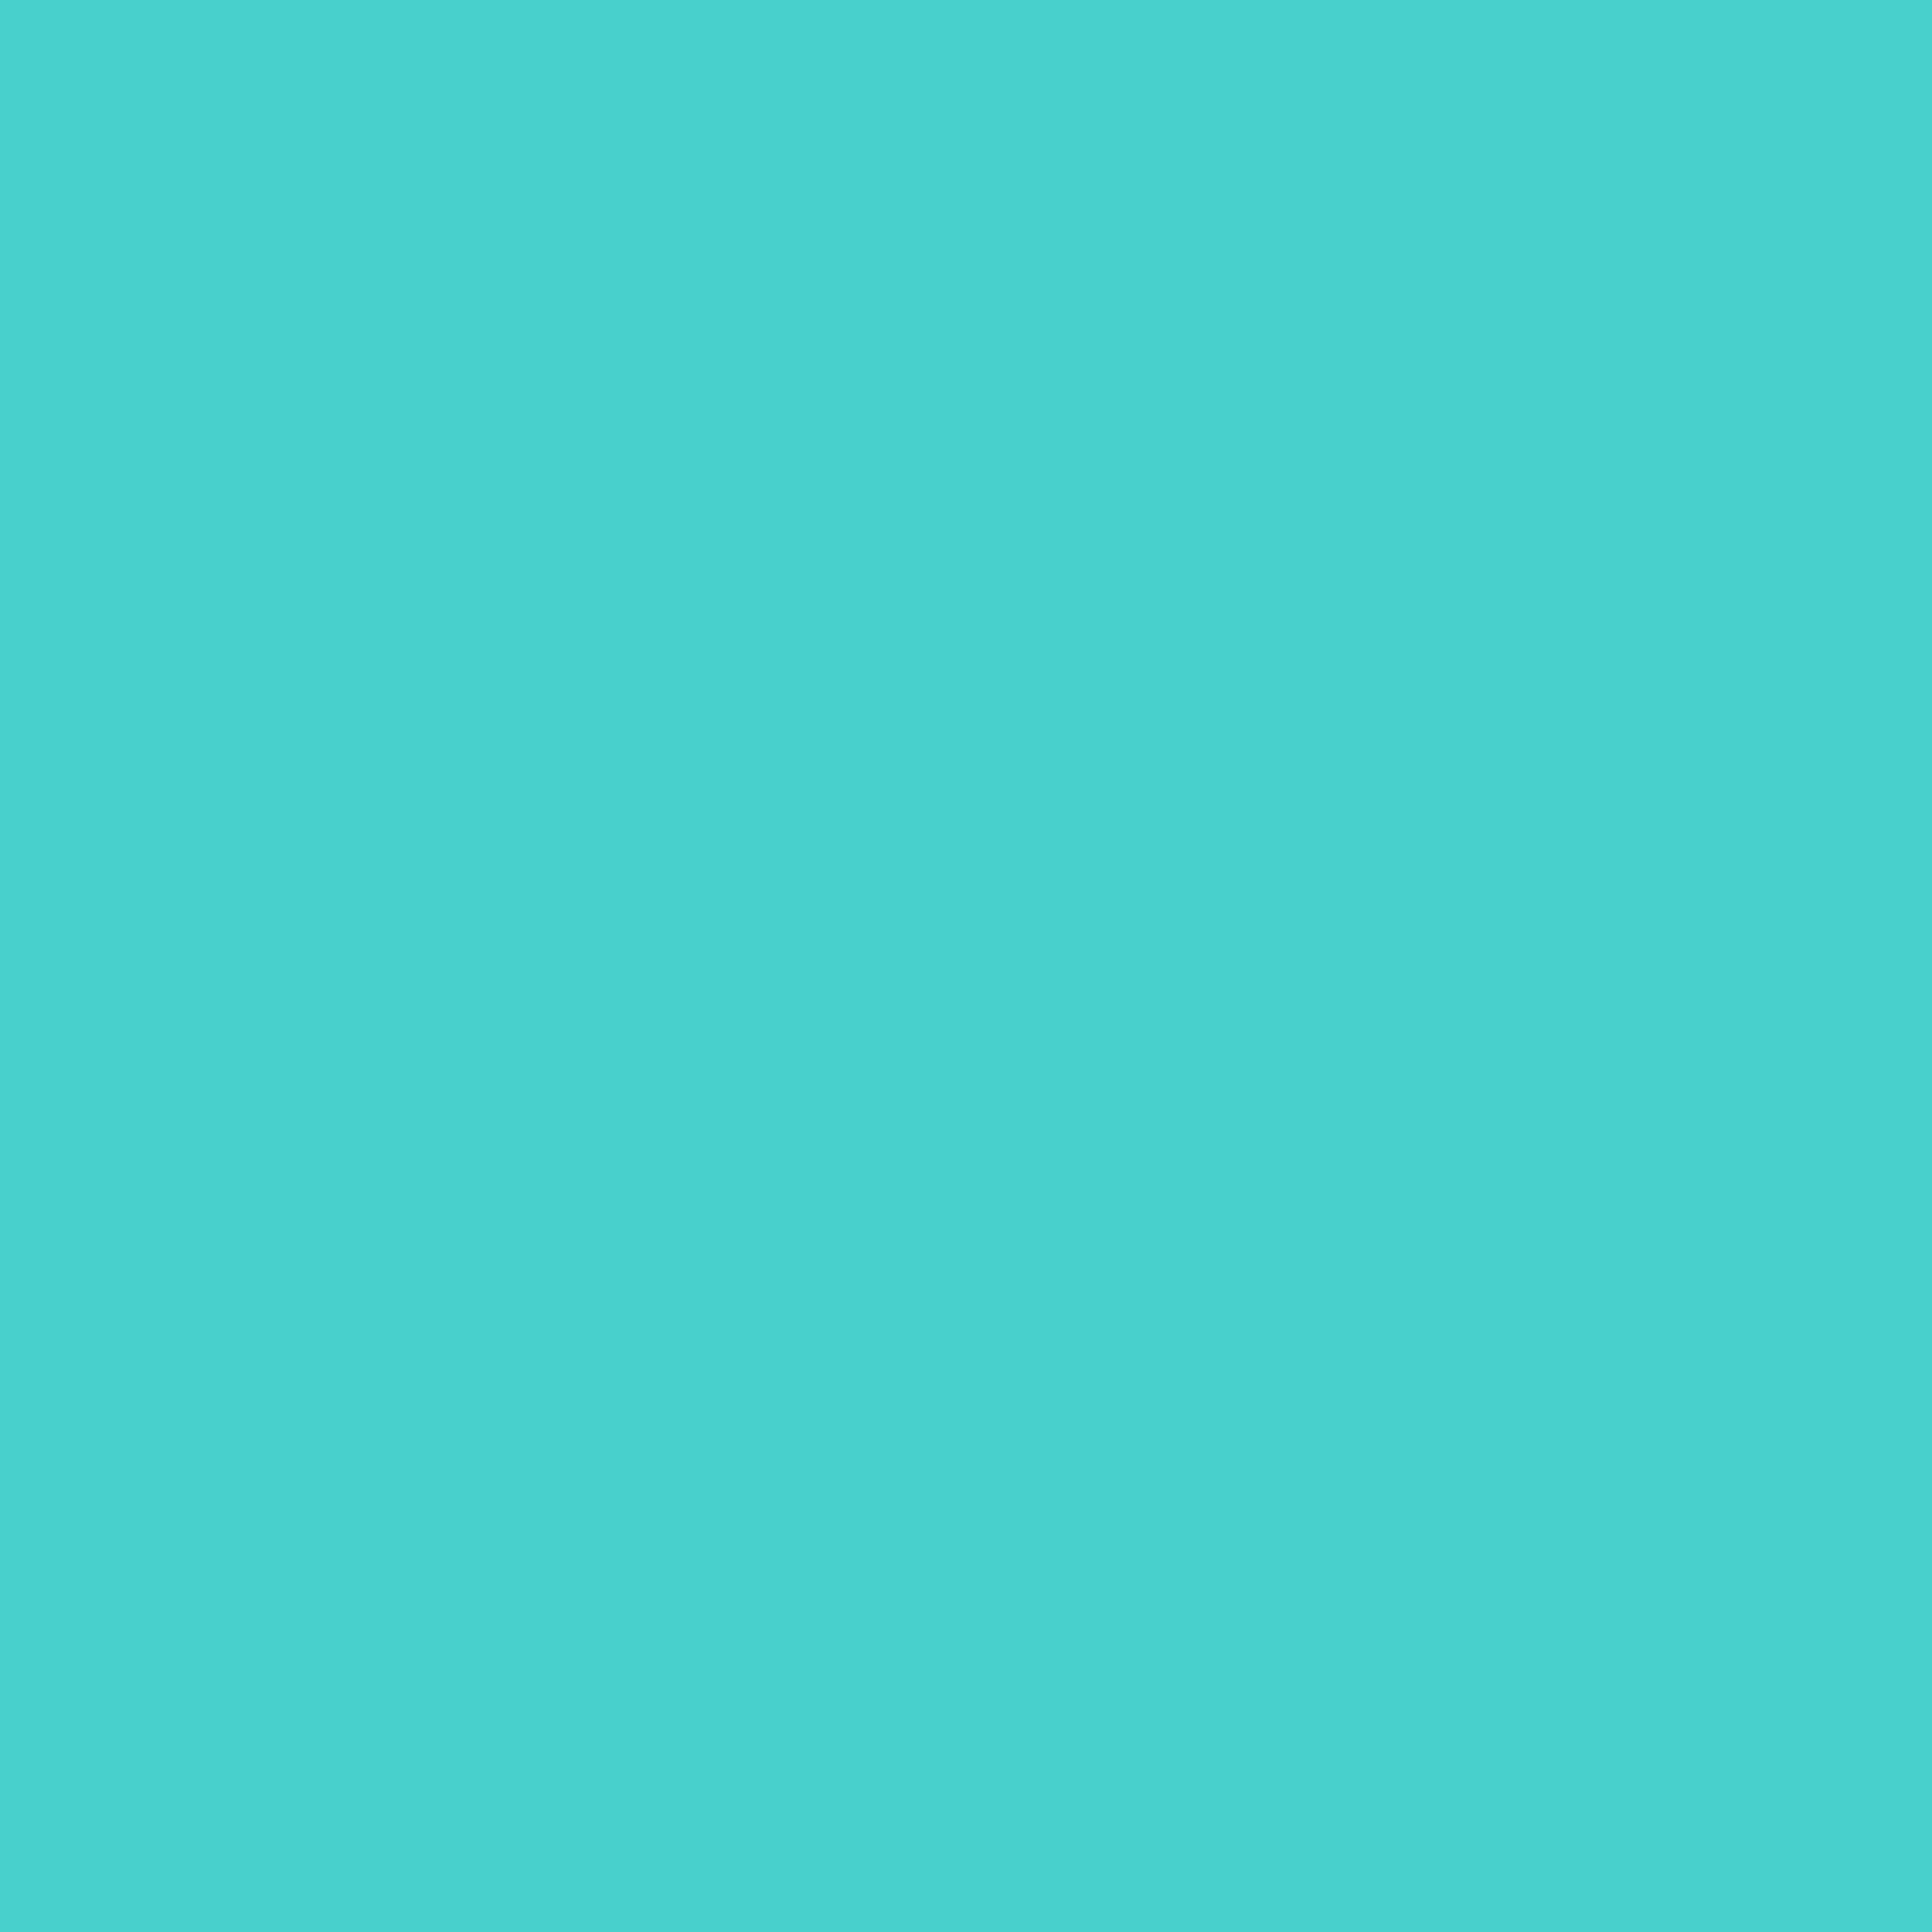 3600x3600 Medium Turquoise Solid Color Background